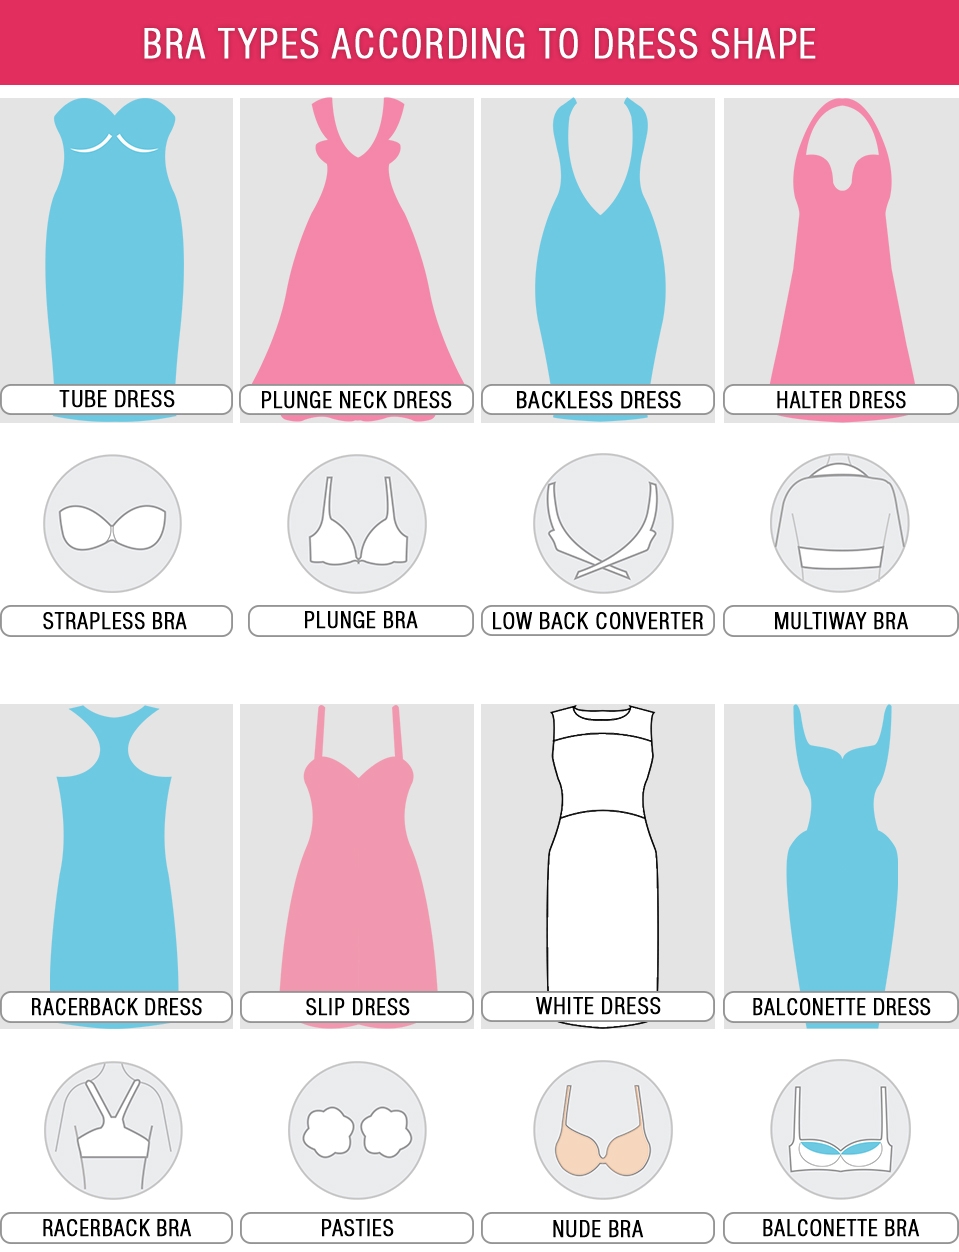 Know your body type to Buy Perfect Bra